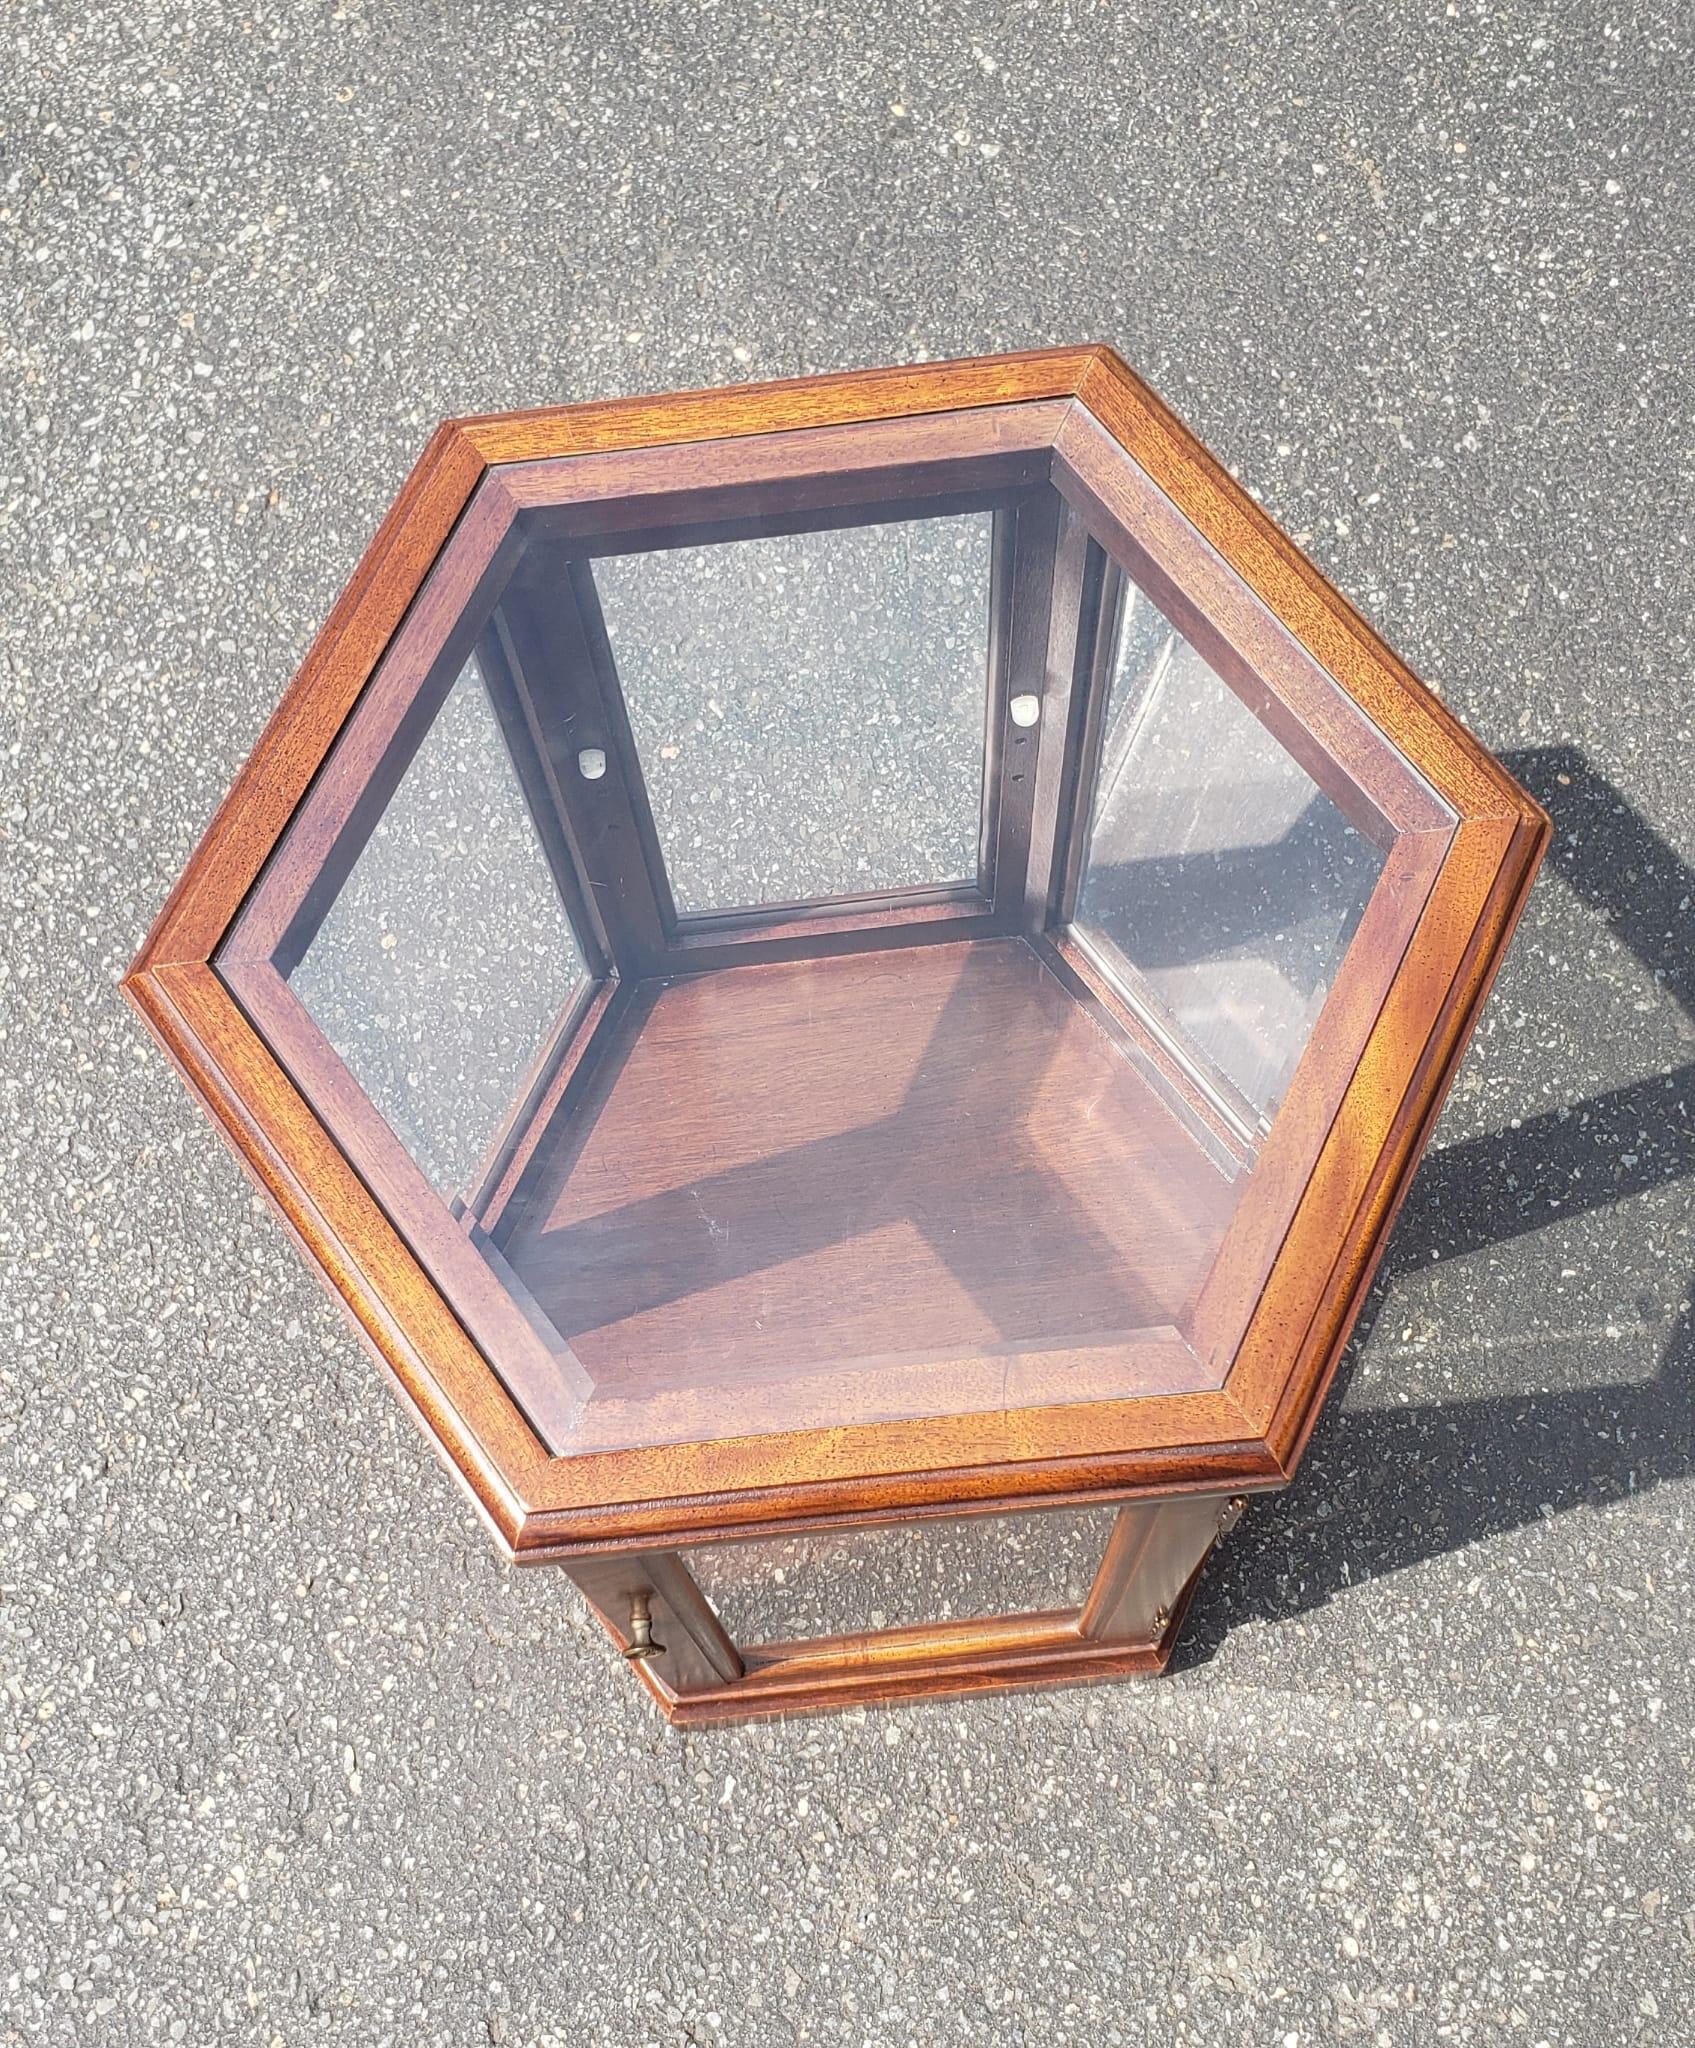 Other Vintage Fruitwood and Glass Paneled Hexagonal Side Table For Sale